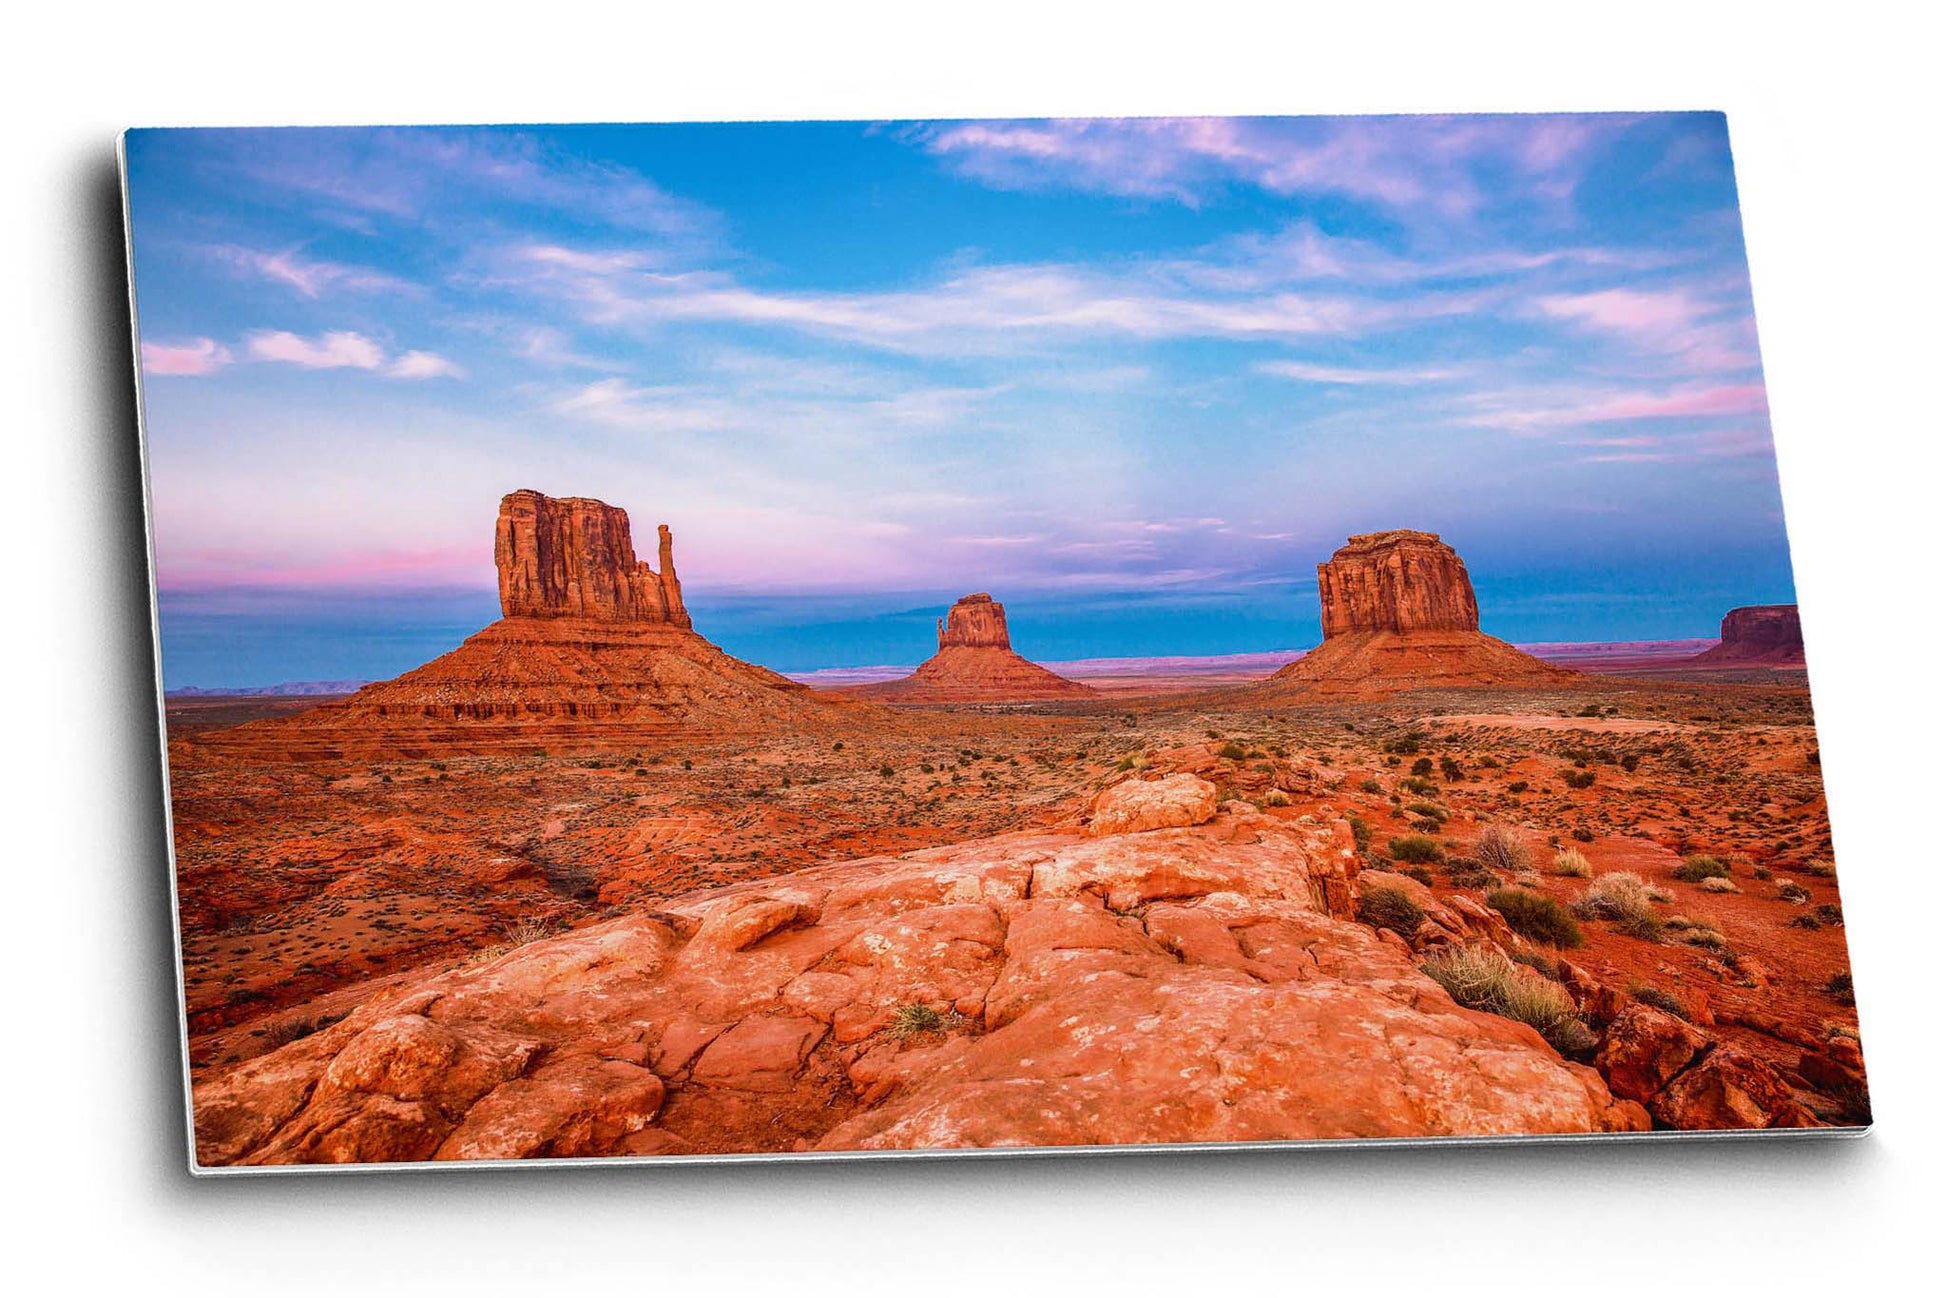 Western landscape metal print of the Mittens under a scenic sky at sunset in Monument Valley along the Arizona and Utah border by Sean Ramsey of Southern Plains Photography.